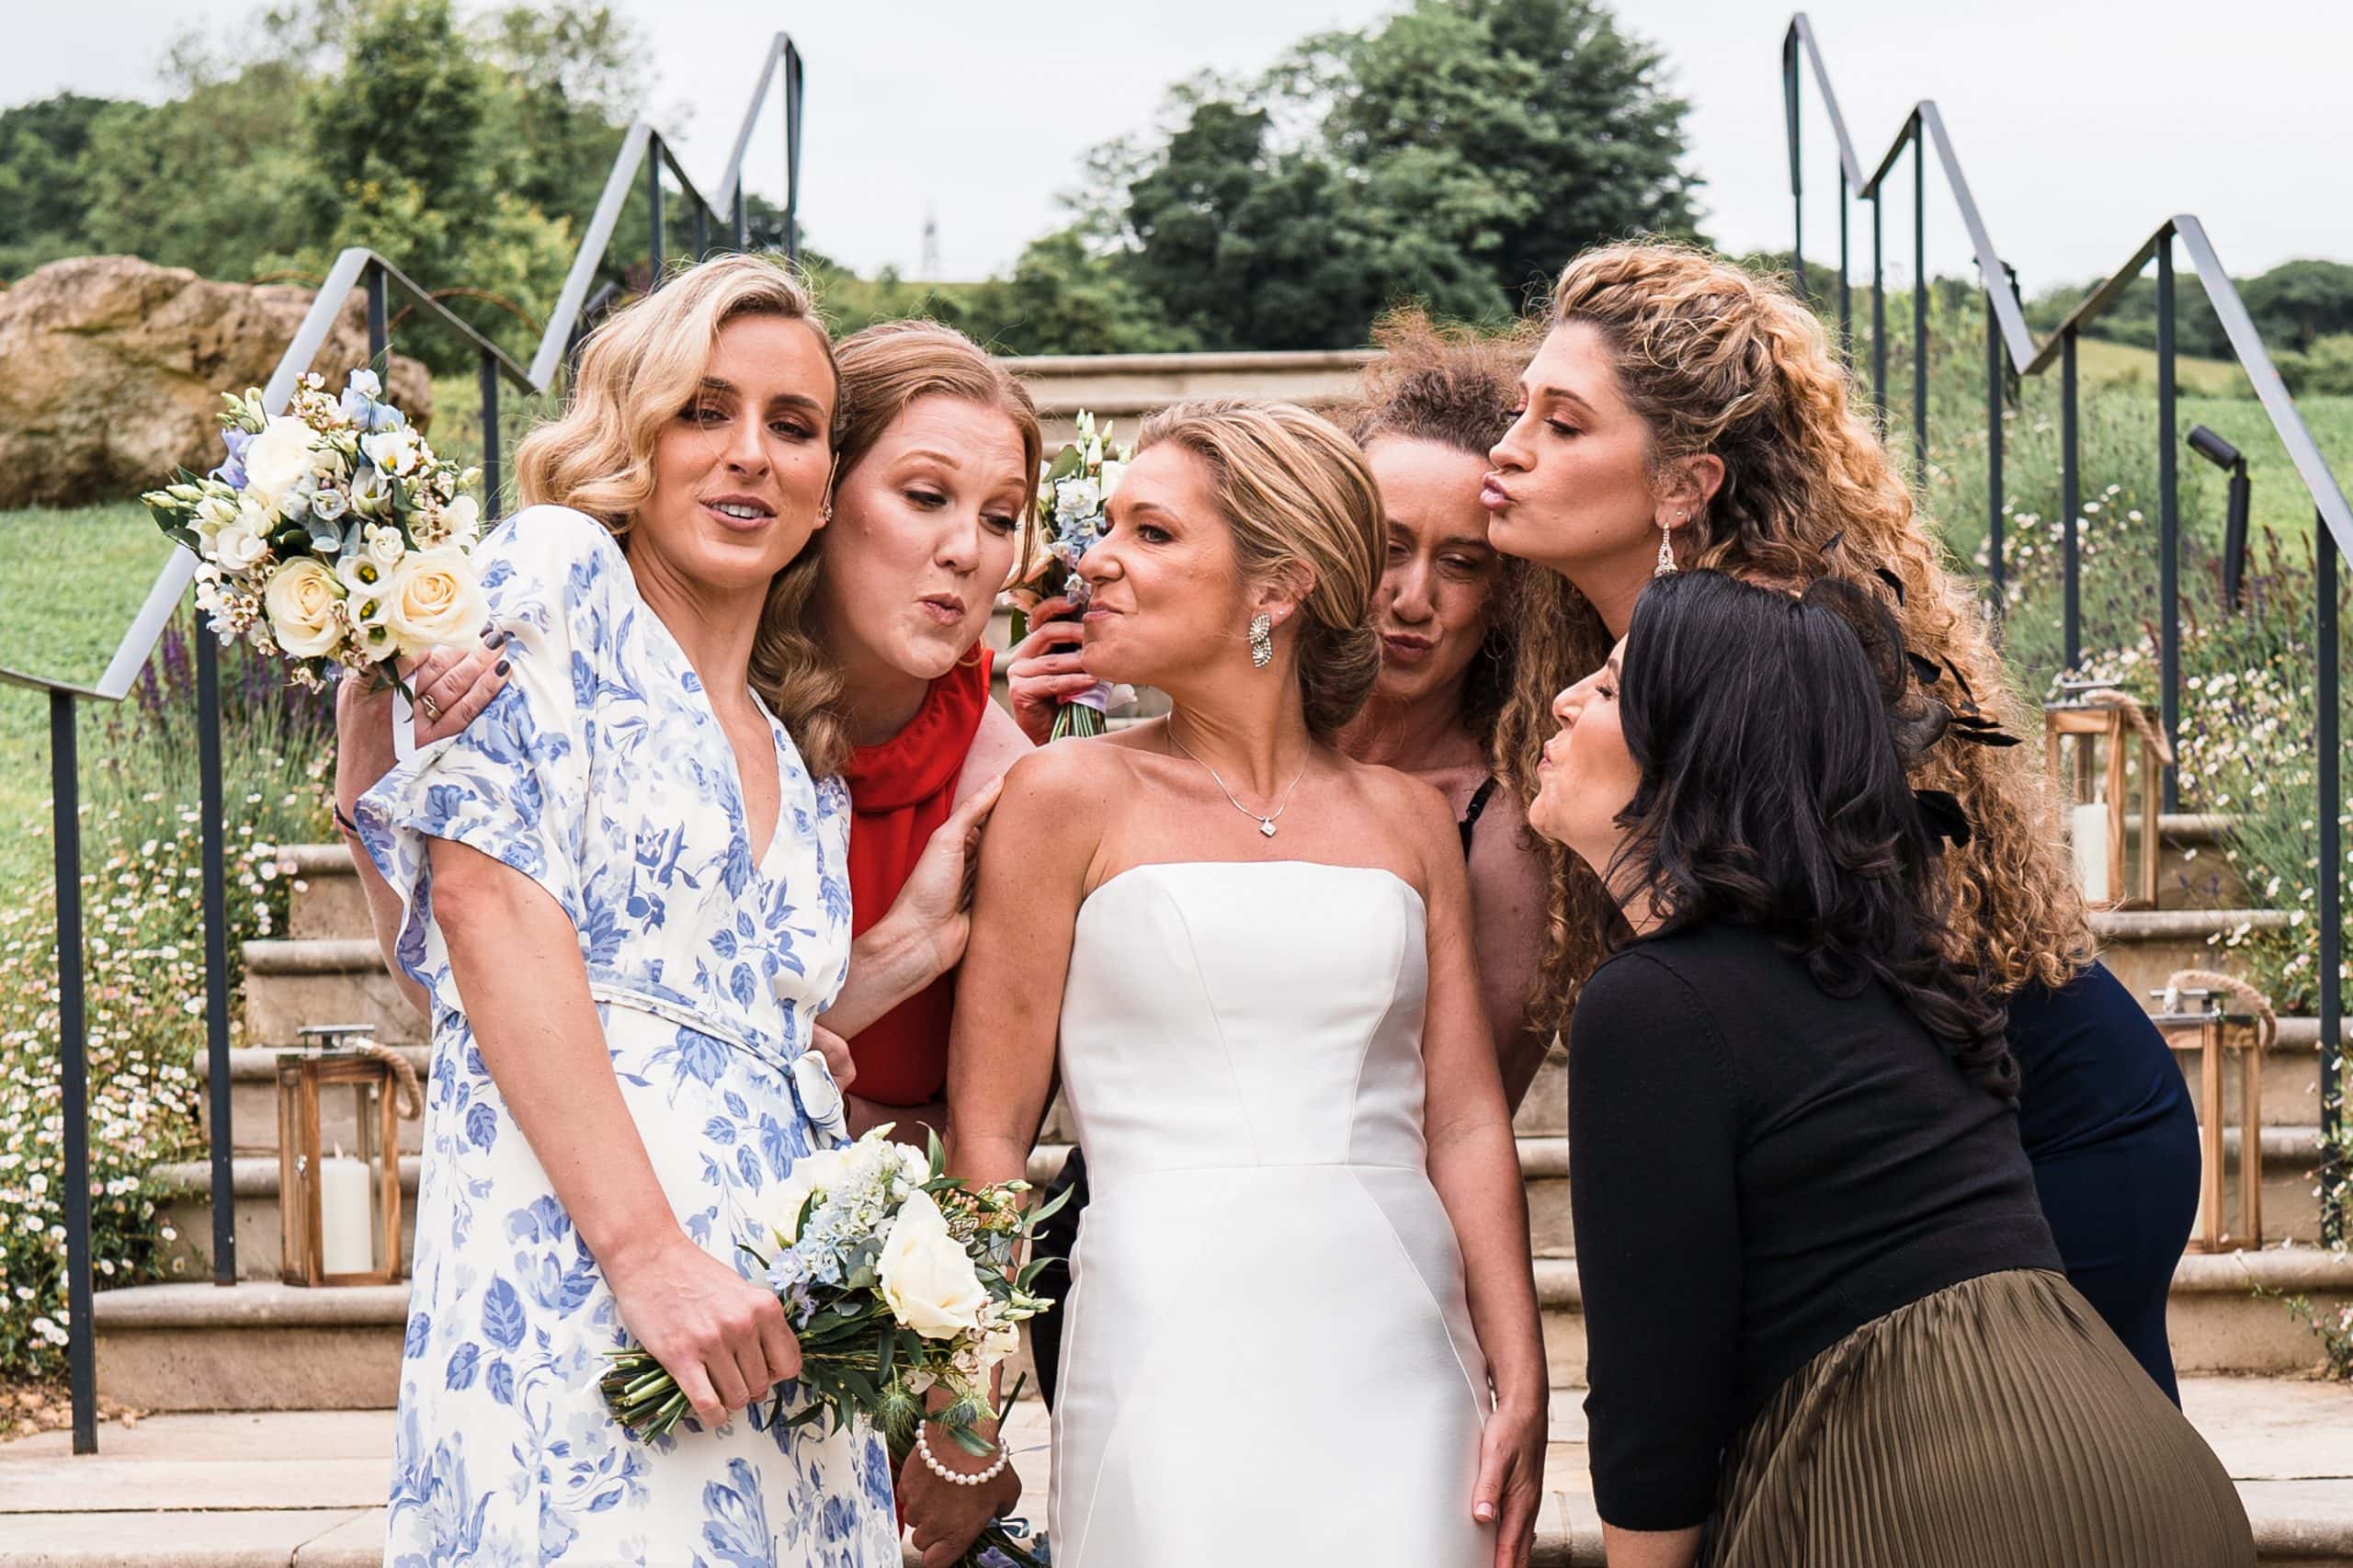 Nothing more important at your wedding than having your gang to celebrate with